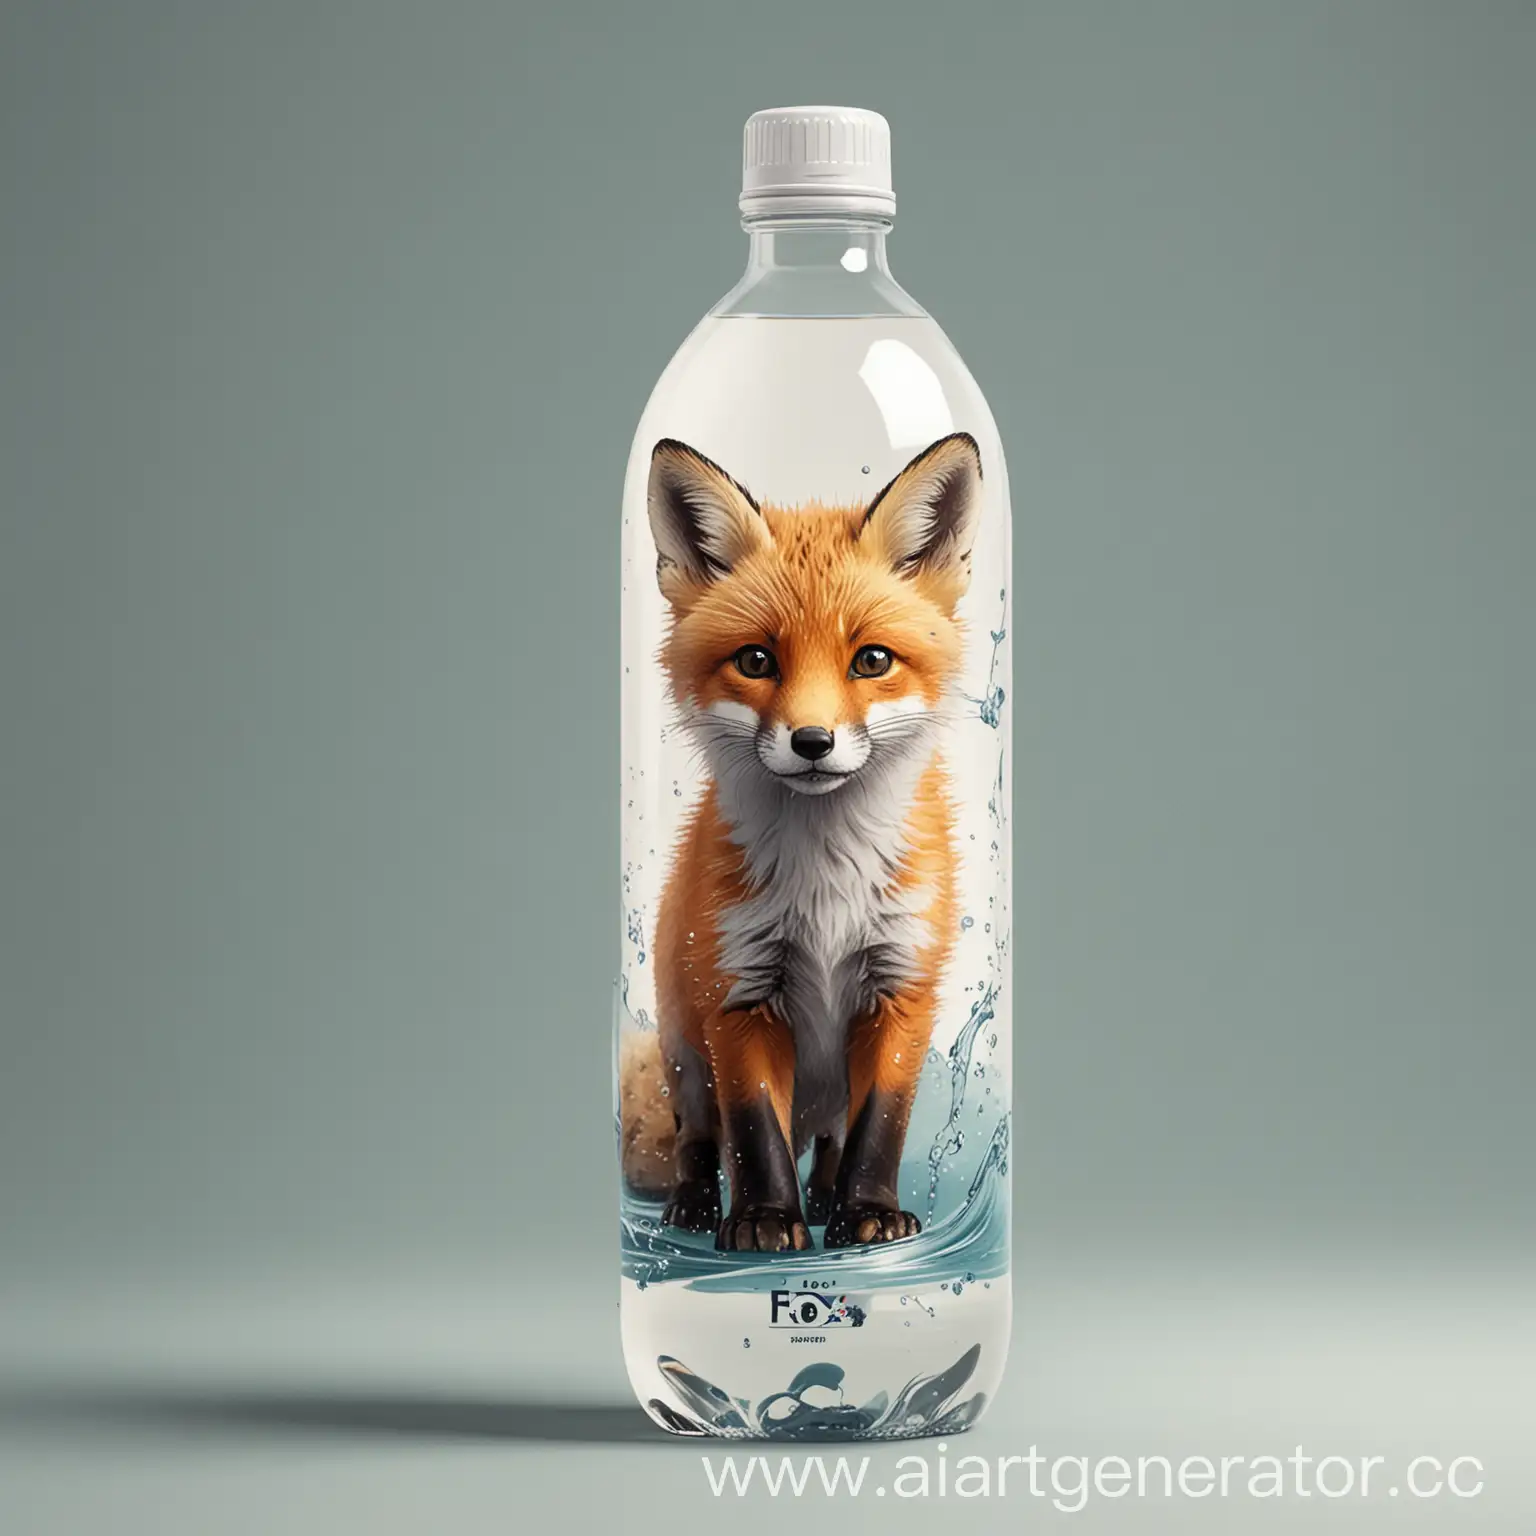 Adorable-Fox-Cub-Design-on-Water-Packaging